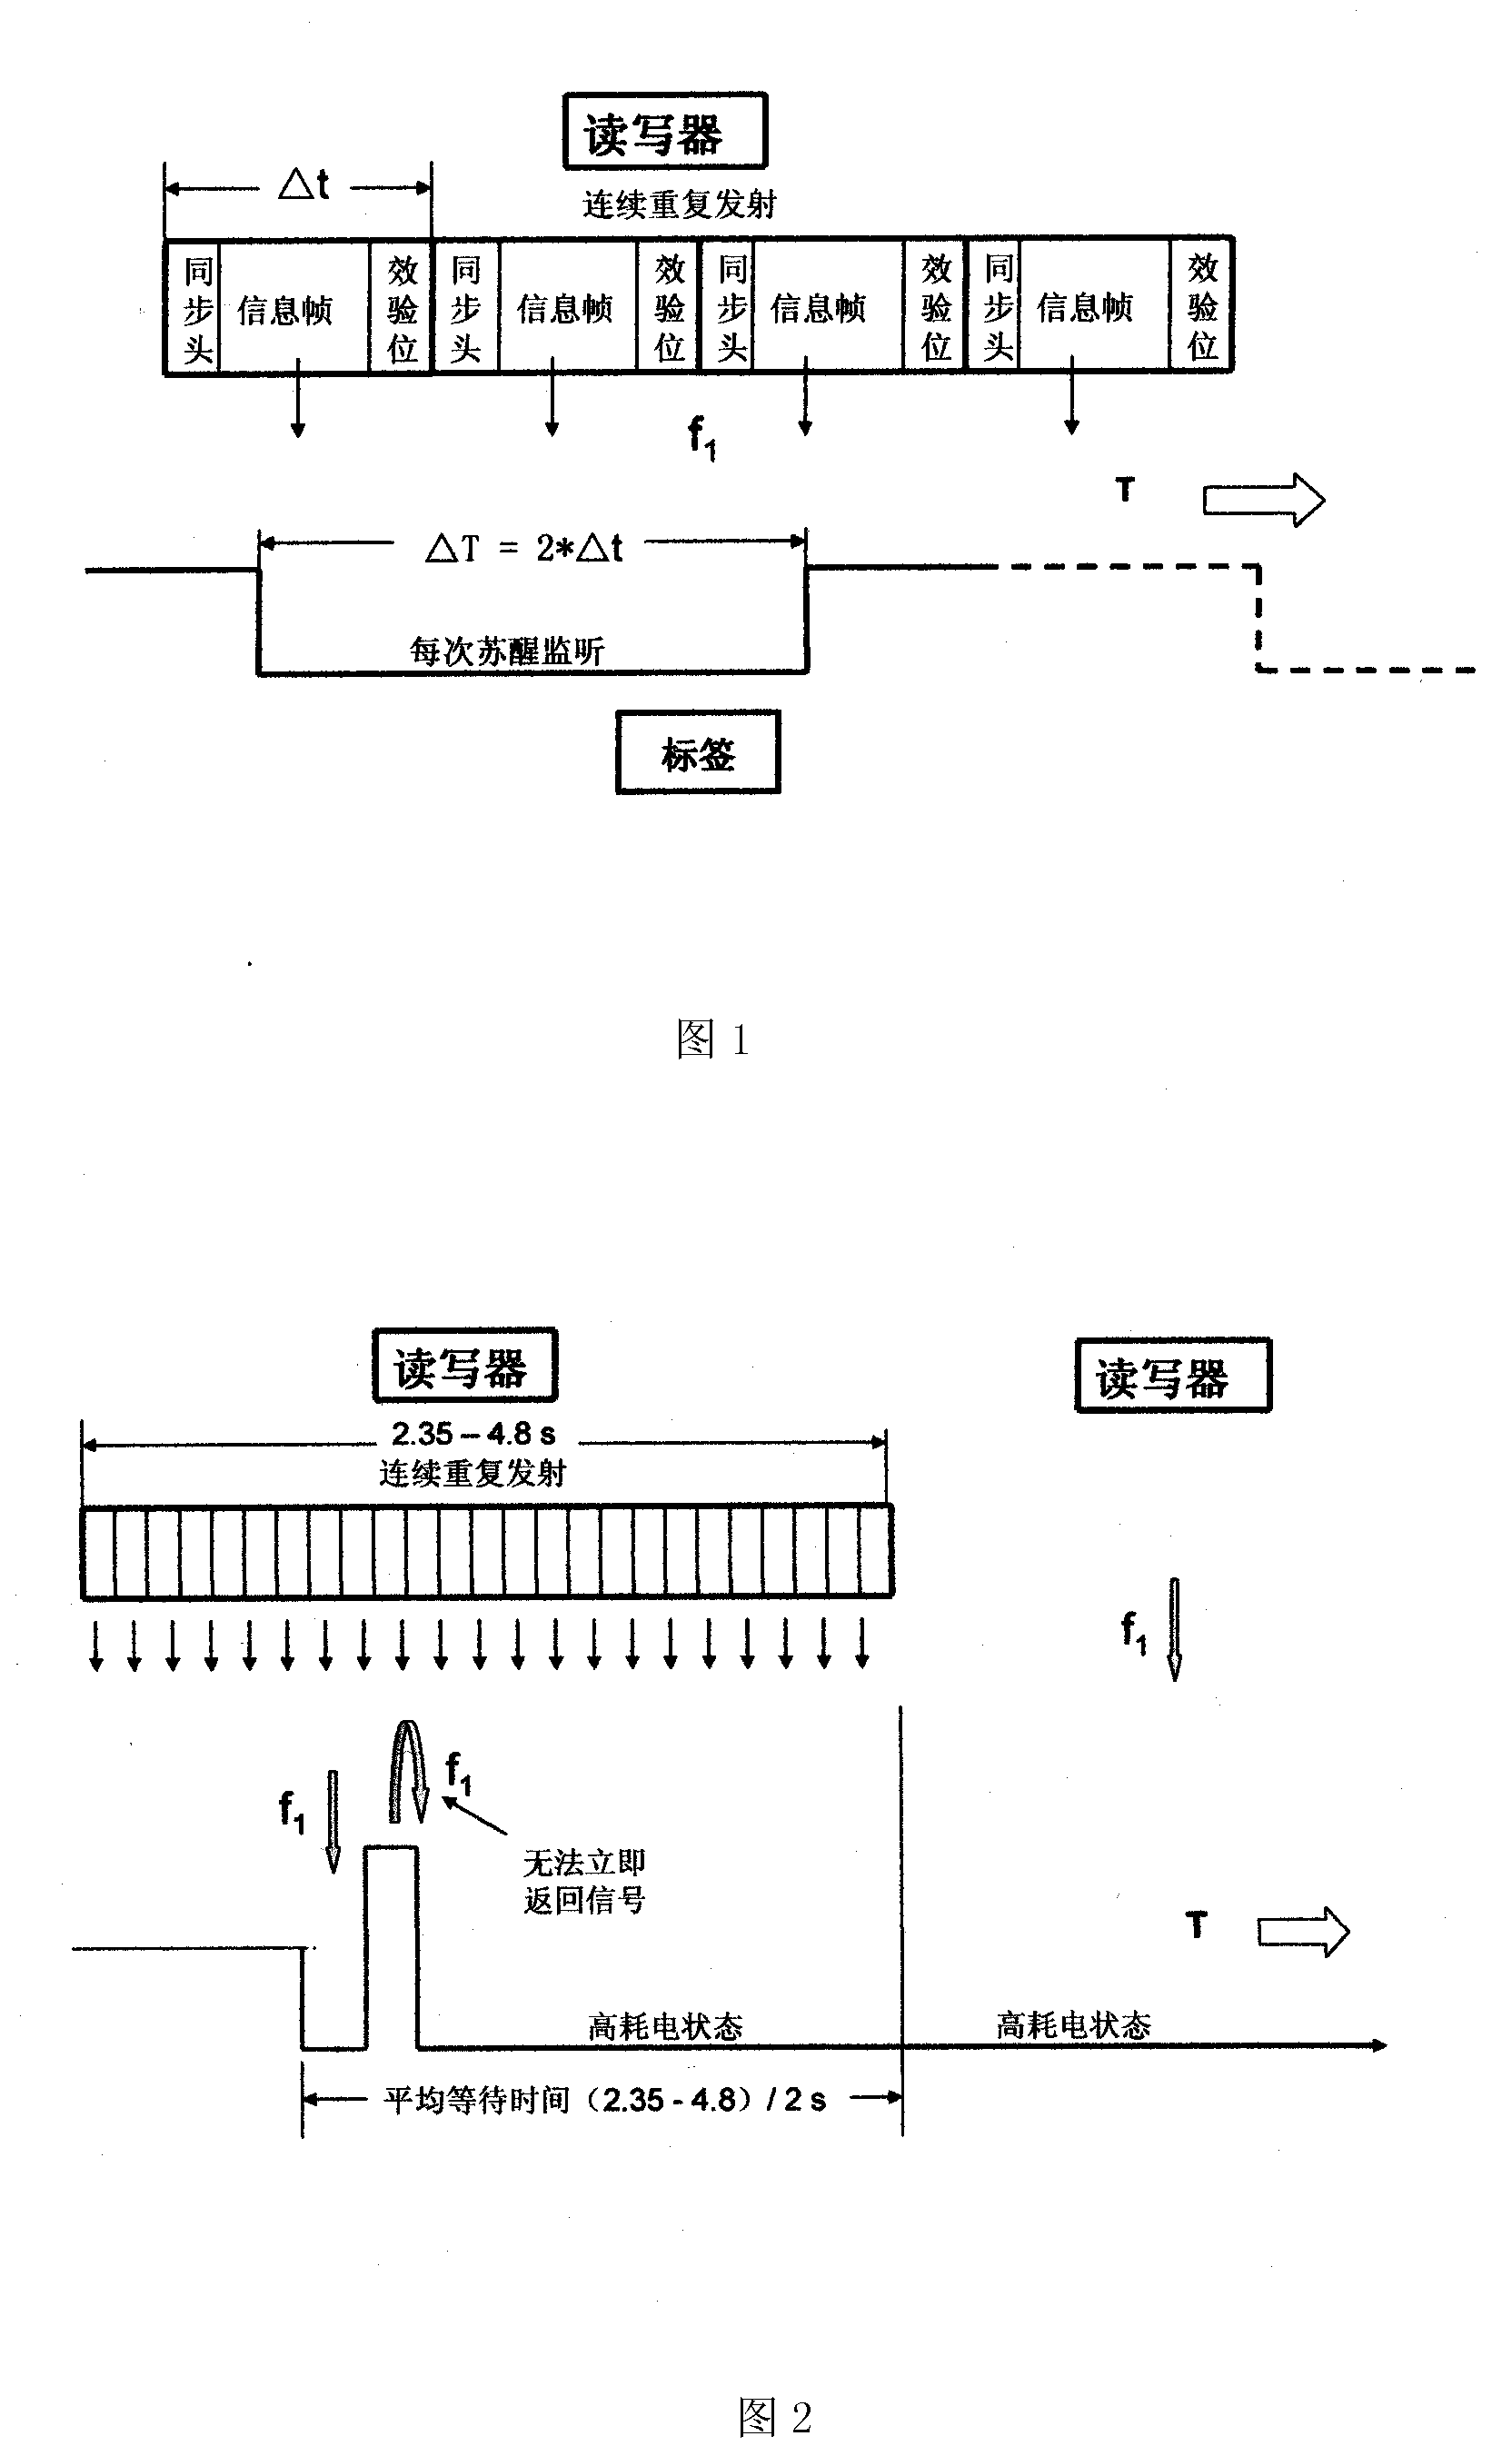 Wireless telemetering telecontrol system and method with ultra-low power consumption